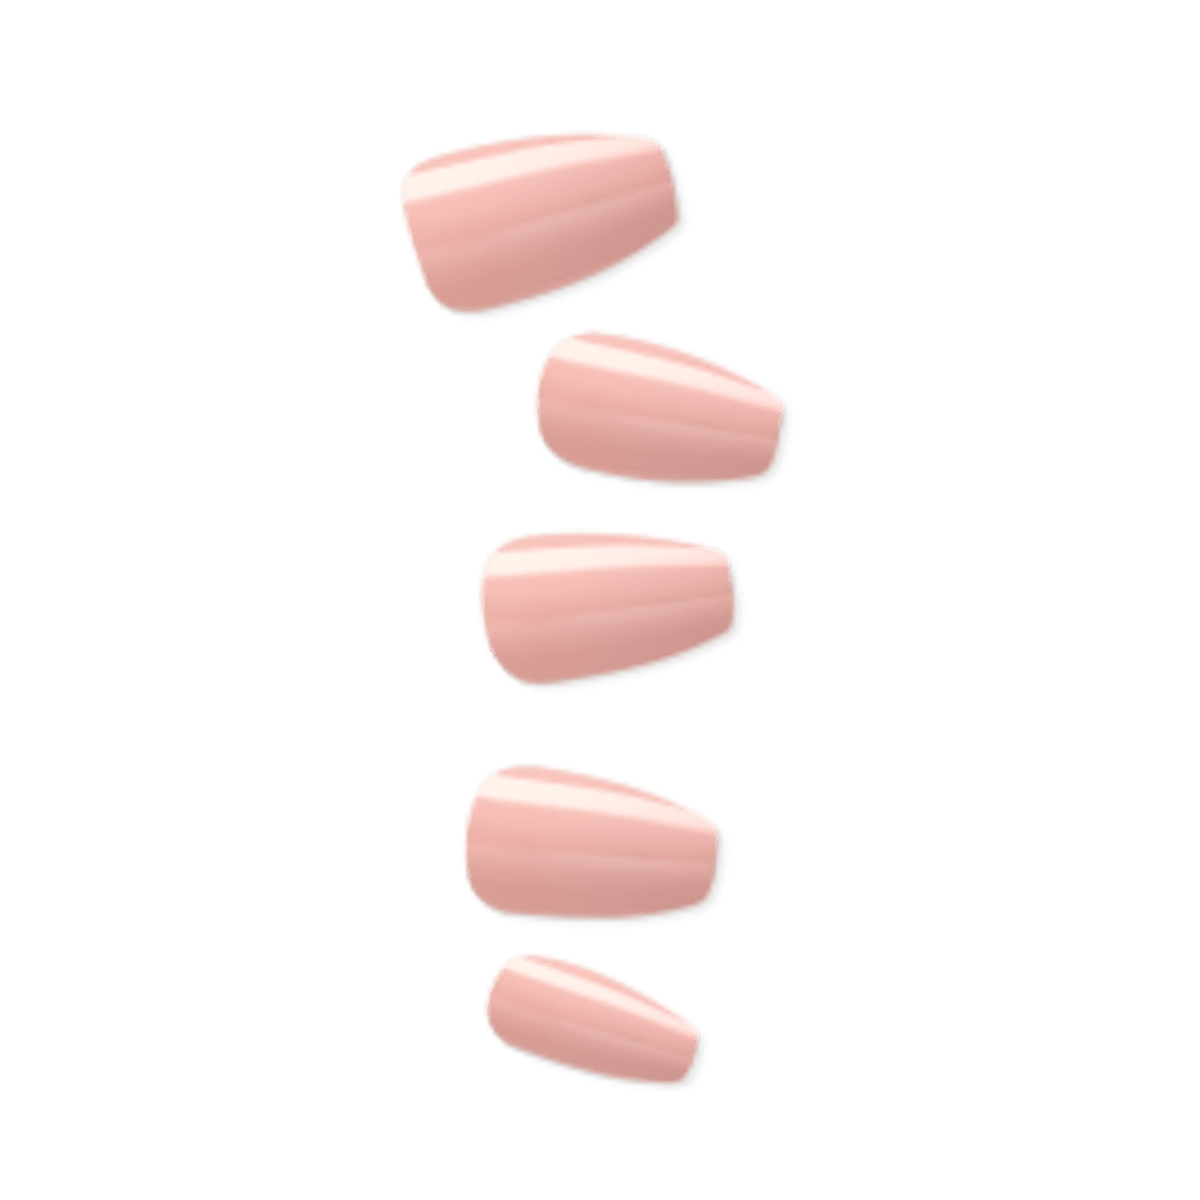 Green Nail Syndrome - What is GNS? How to treat and prevent? – LÓA NAILS